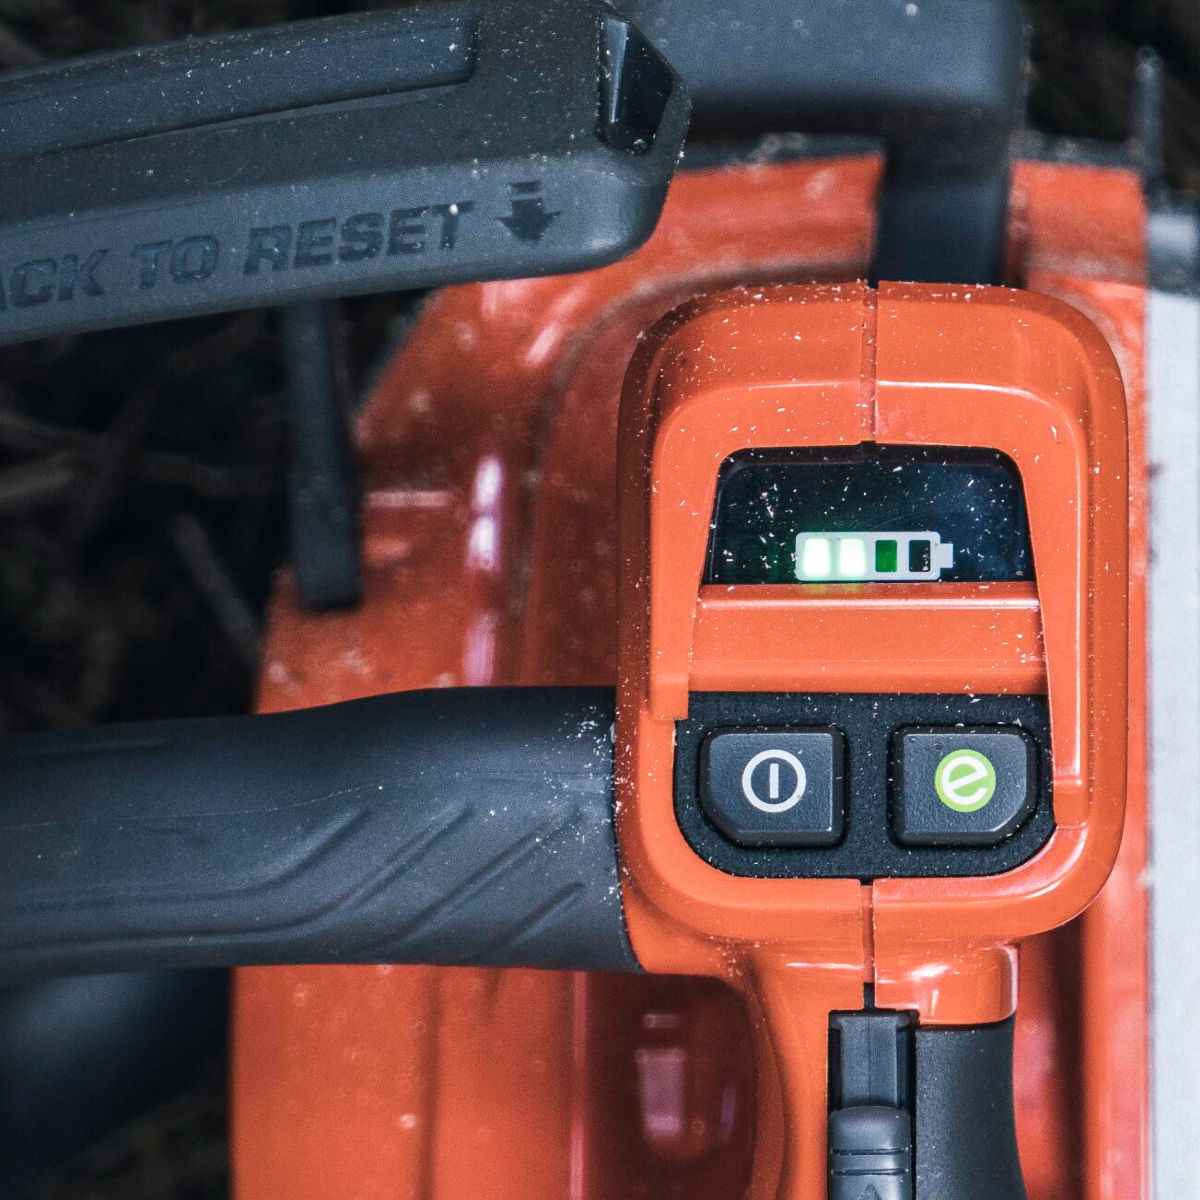 Handle of a battery powered chainsaw